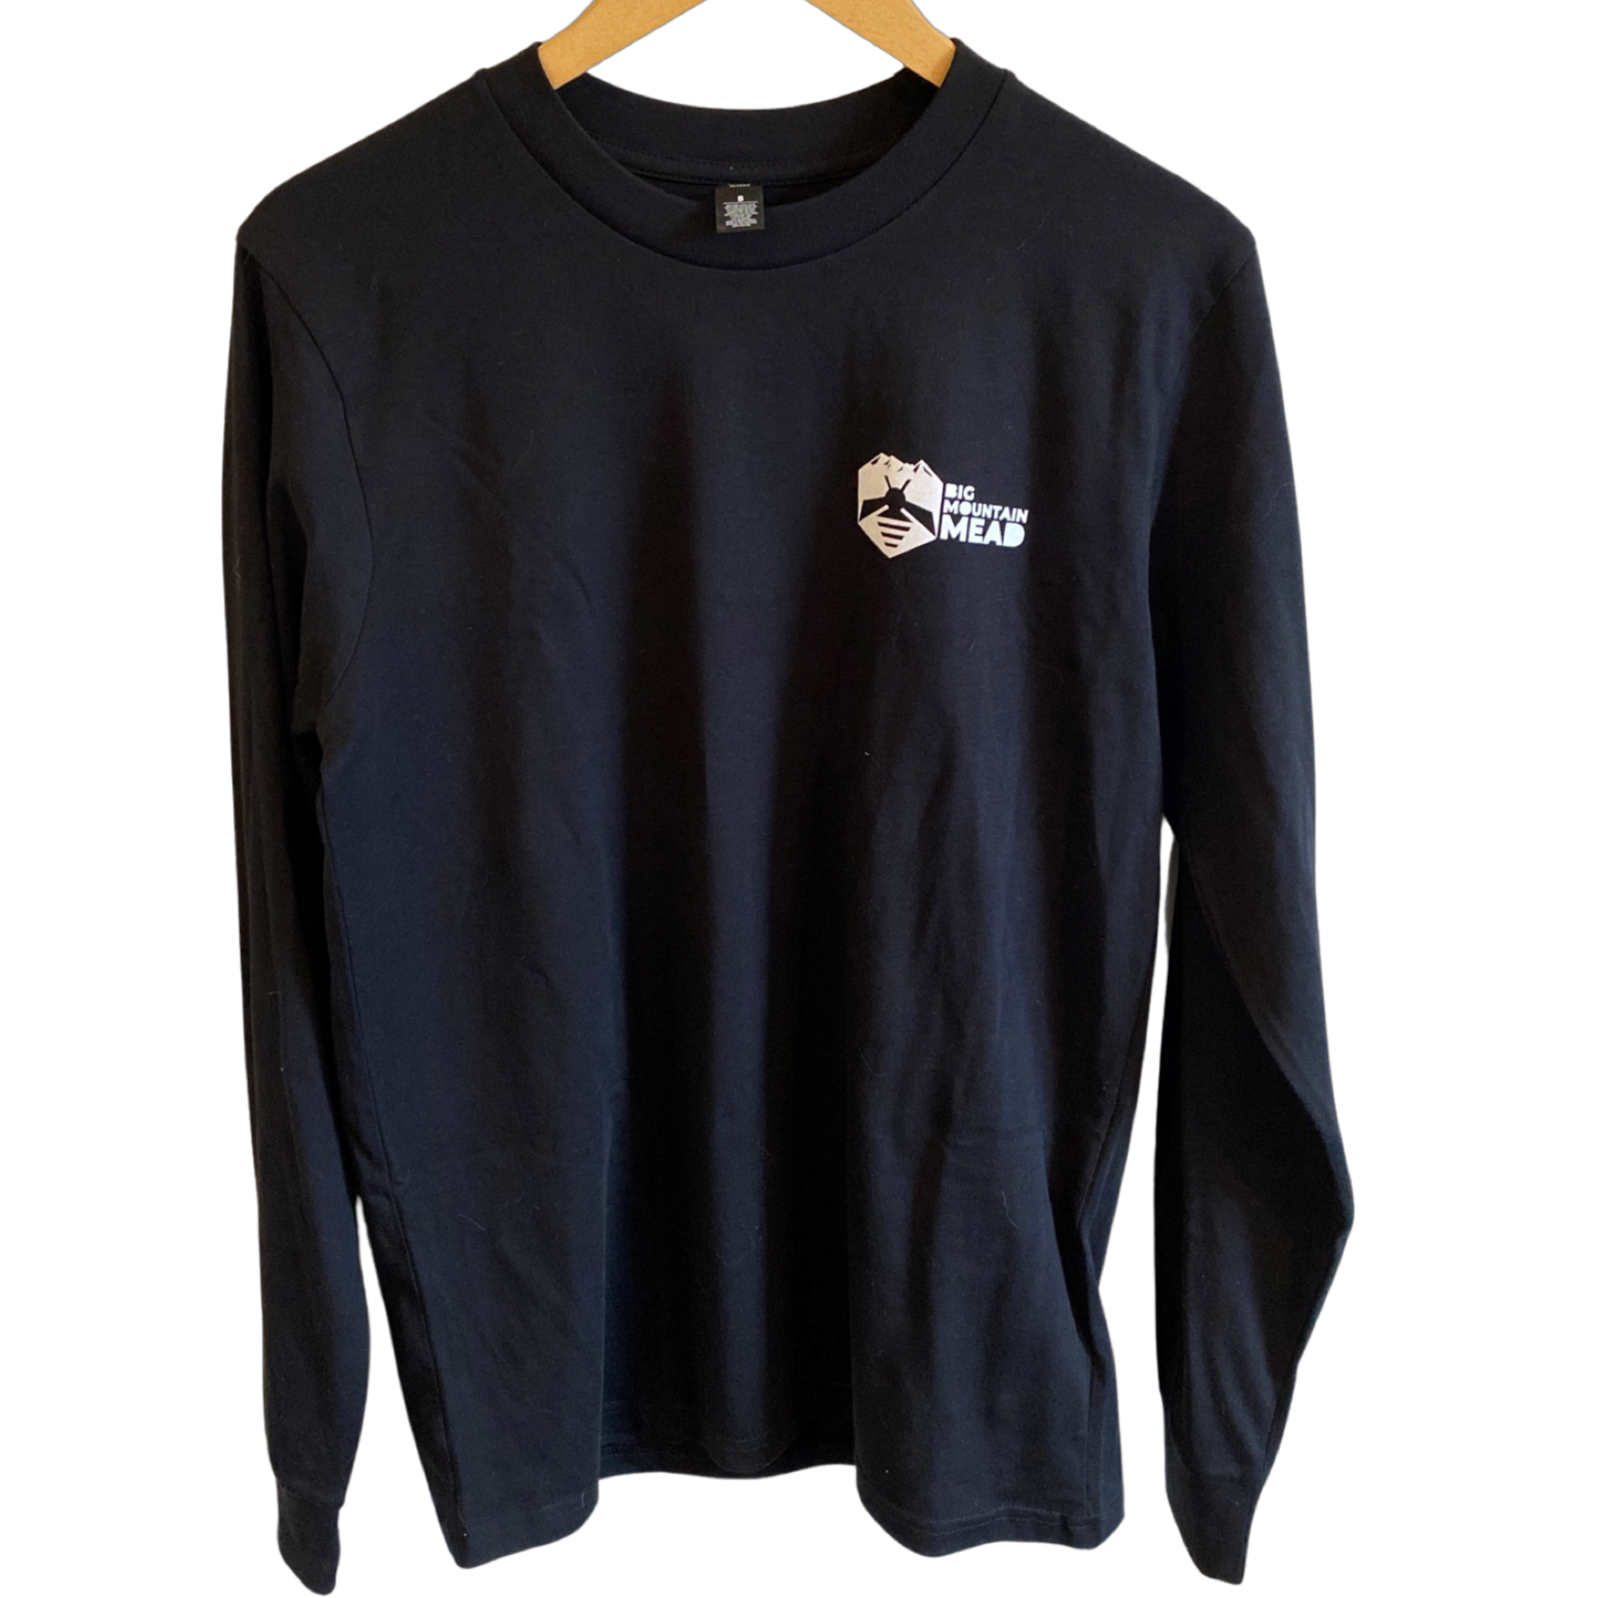 Big Mountain Mead Long Sleeved Tee in black - front